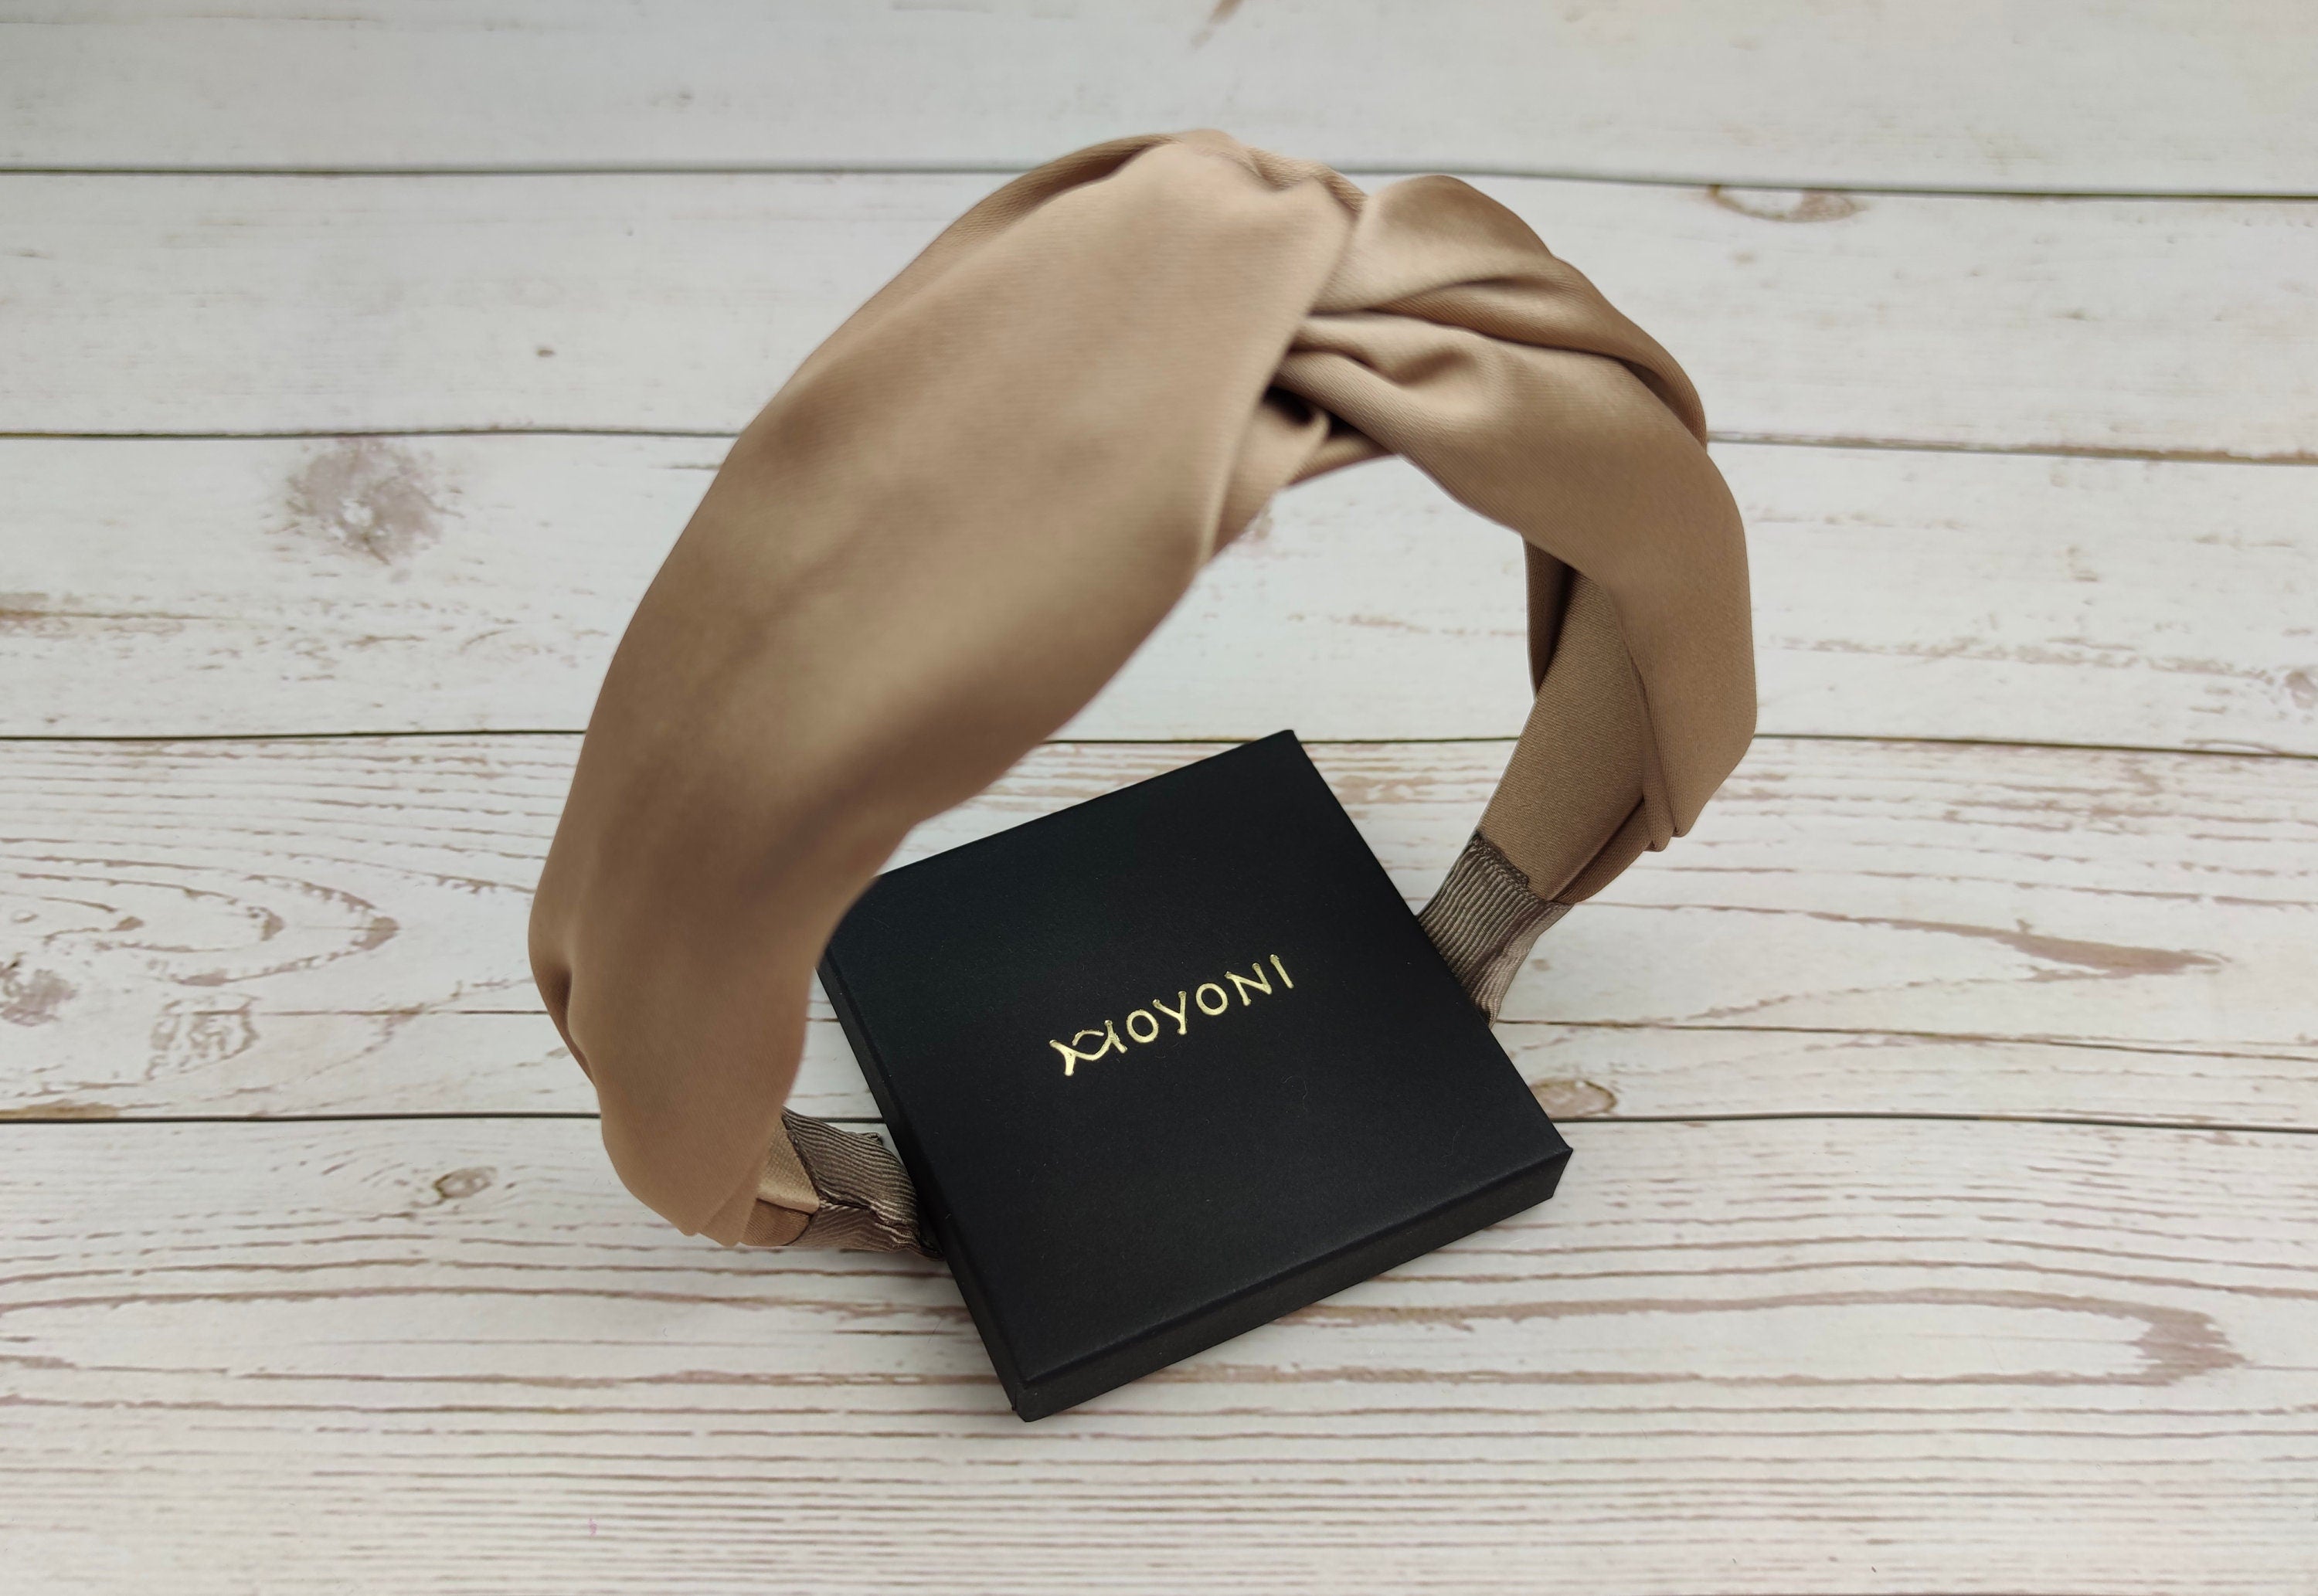 Add a touch of luxury to your summer style with our New Design Fashion Hairband. This headband features a stylish knot design and a beautiful beige color, perfect for any outfit. The soft and comfortable satin material is perfect for all-day wear.